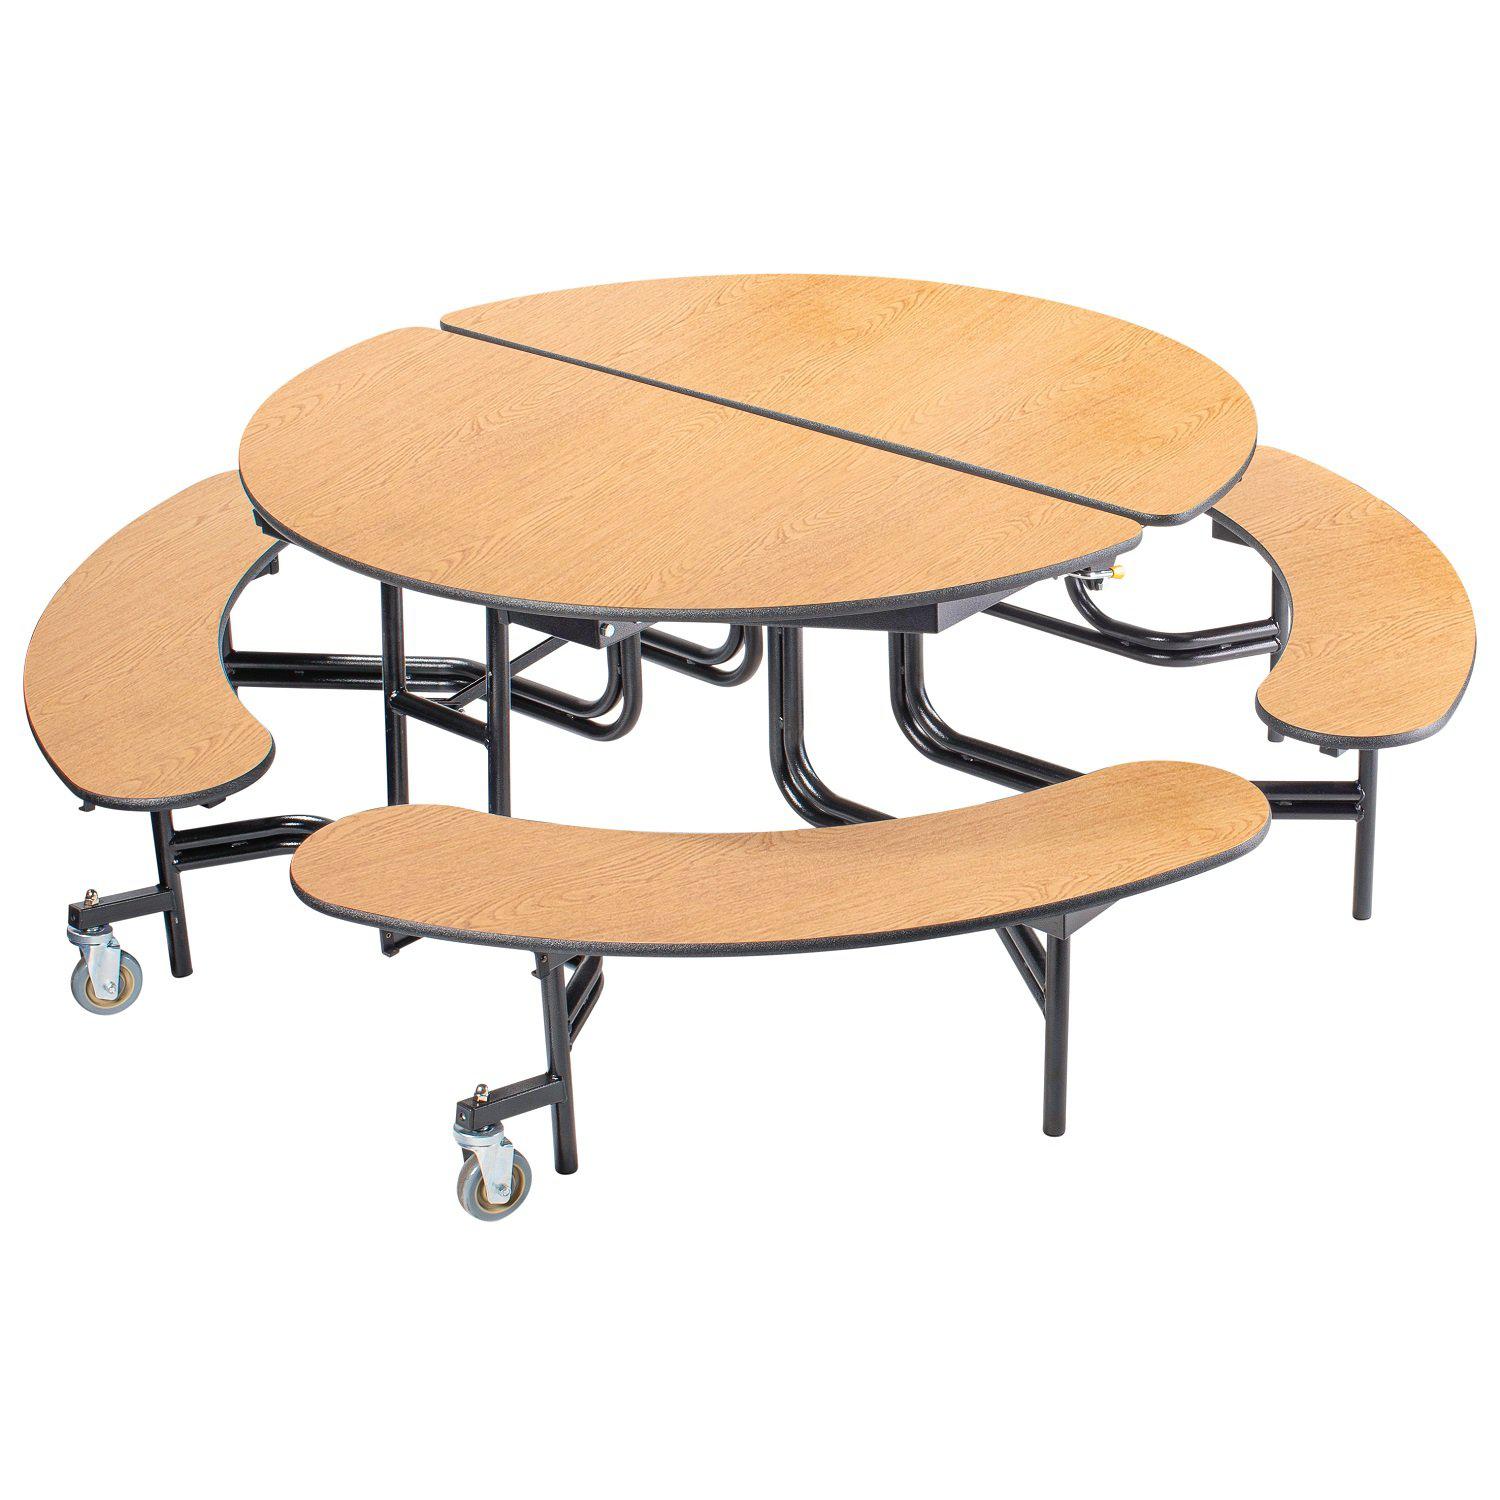 Mobile Cafeteria Table with Benches, 60" Round, Plywood Core, Vinyl T-Mold Edge, Textured Black Frame